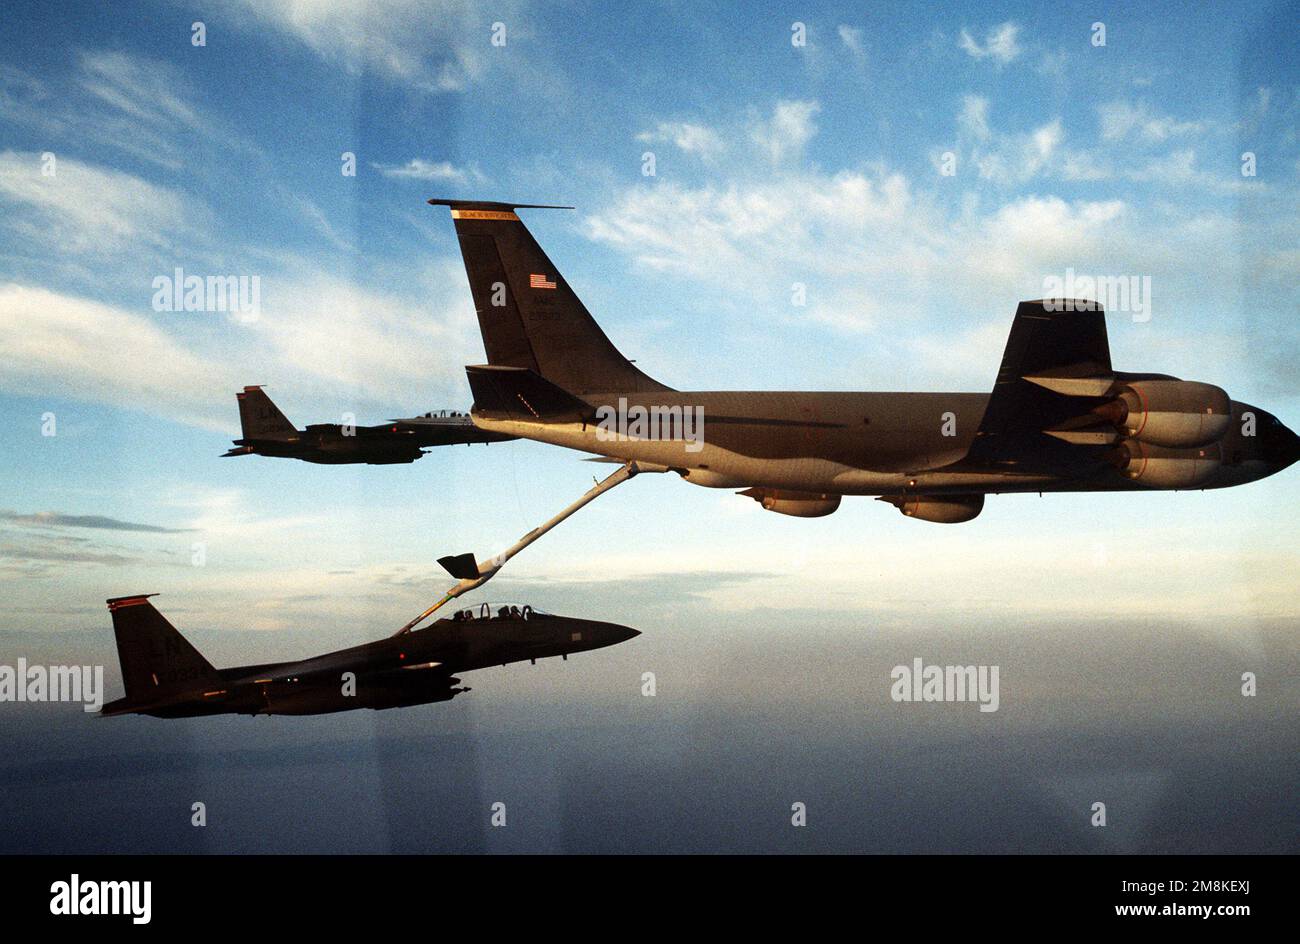 Two US Air Force F-15E Strike Eagles from the 494th Fighter Squadron, Lakenheath Royal Air Force, England, refuel from a KC-135 Stratotanker. The aircraft are flying sorties in support of the enforcement of a NATO no fly zone over Bosnia-Herzegovina. Subject Operation/Series: DENY FLIGHT Country: Adriatic Sea Stock Photo